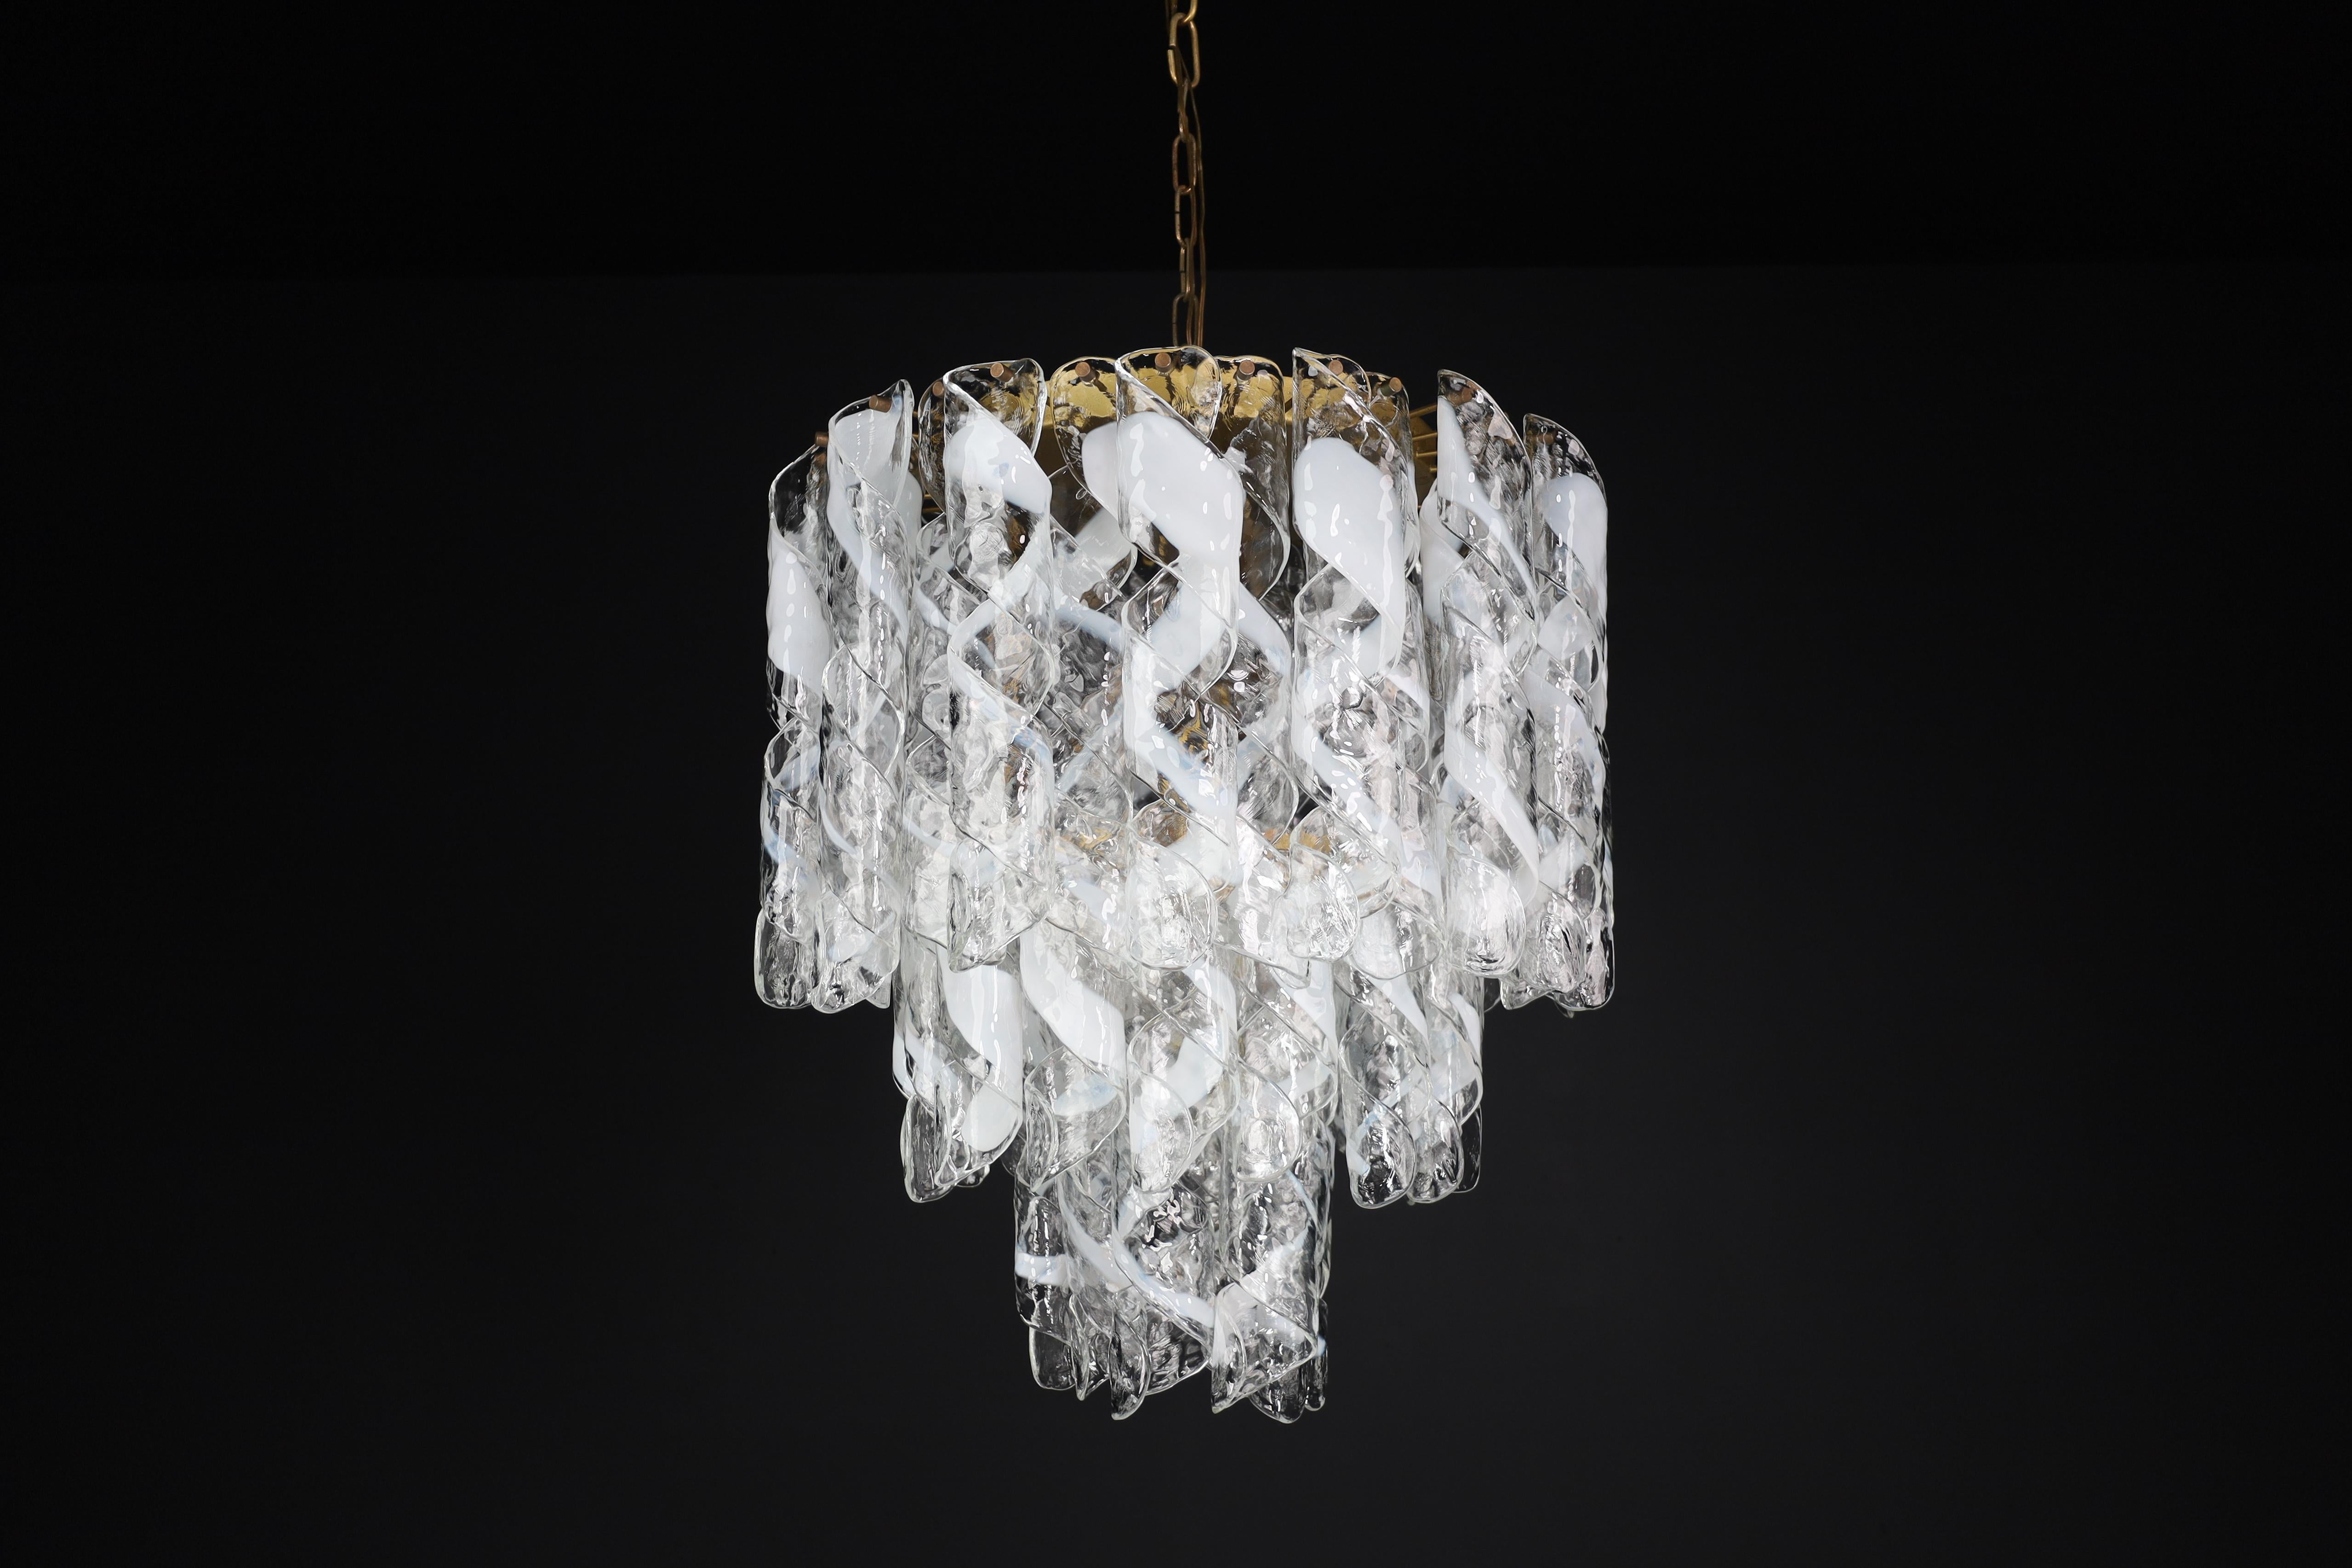 Large Brass Chandelier with 'Torciglioni' Glass by Mazzega, Italy 1970s For Sale 2